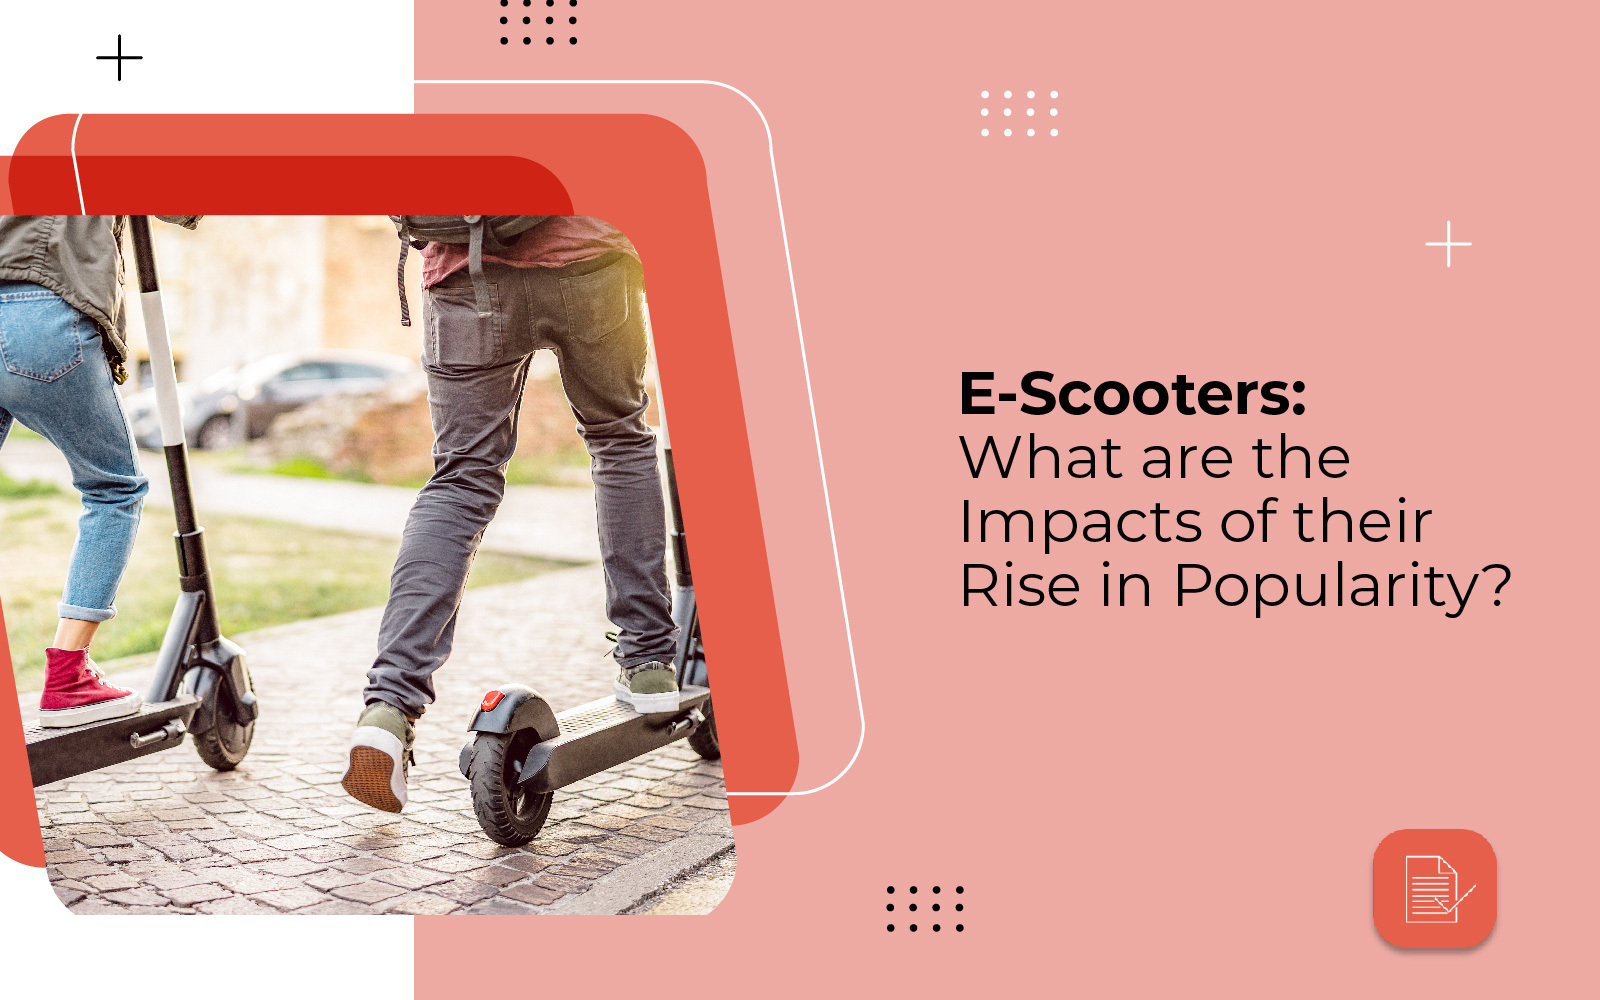 E-Scooters: What are the Impacts of their Rise in Popularity?